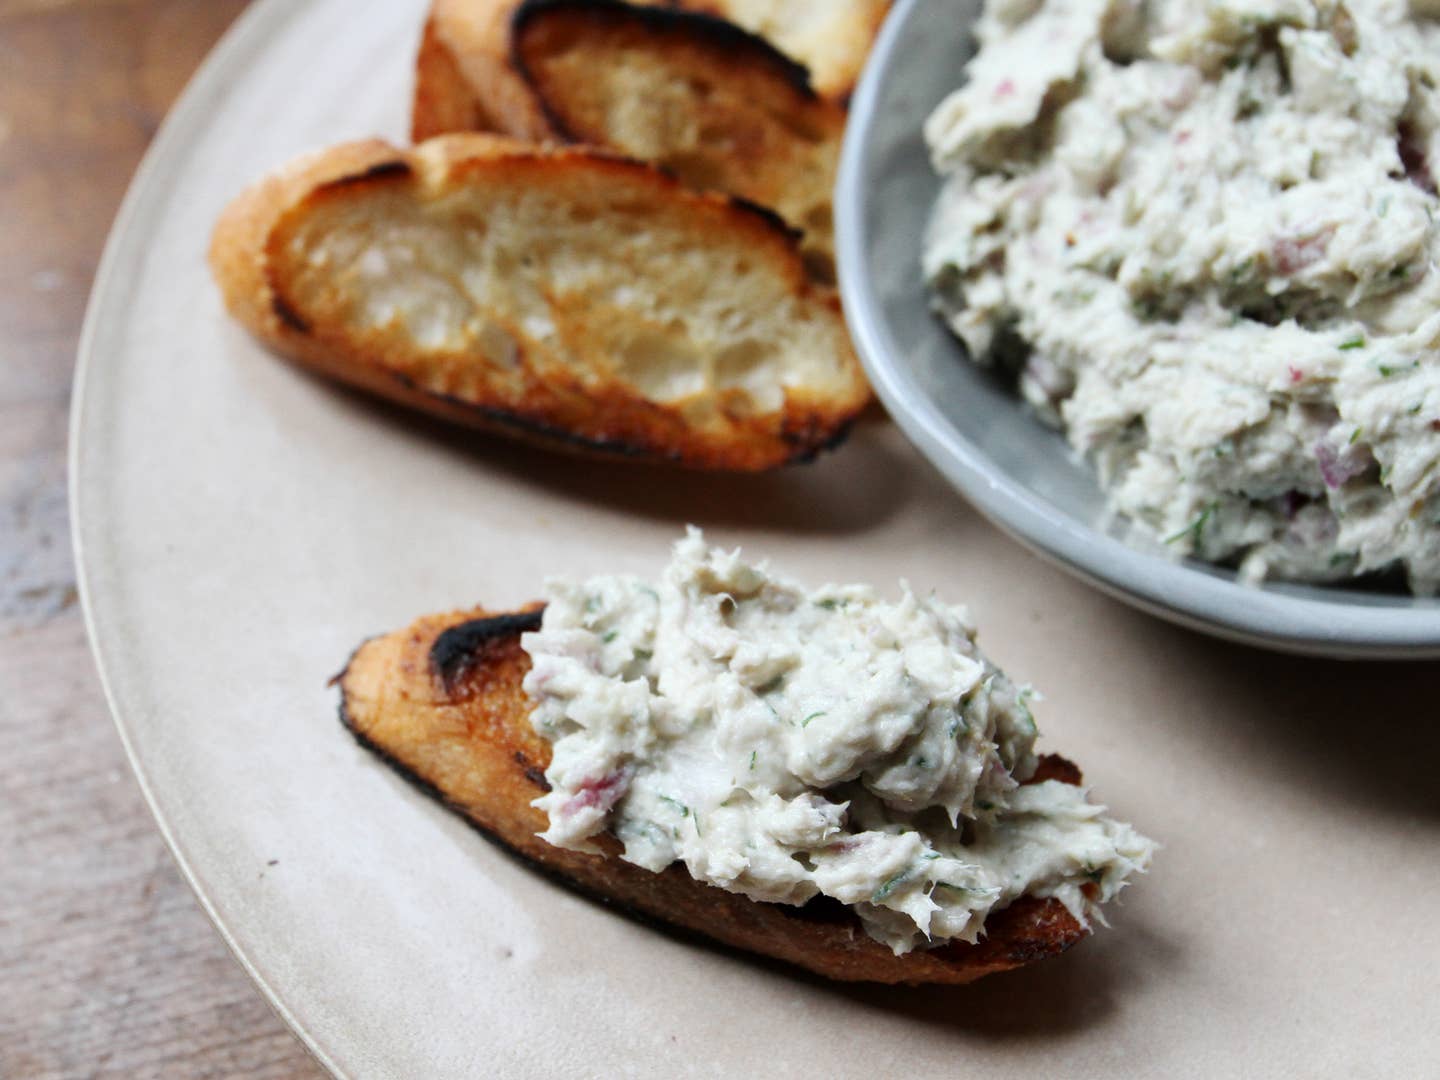 NYC to CSA: A Bluefish Paté for Every Palate